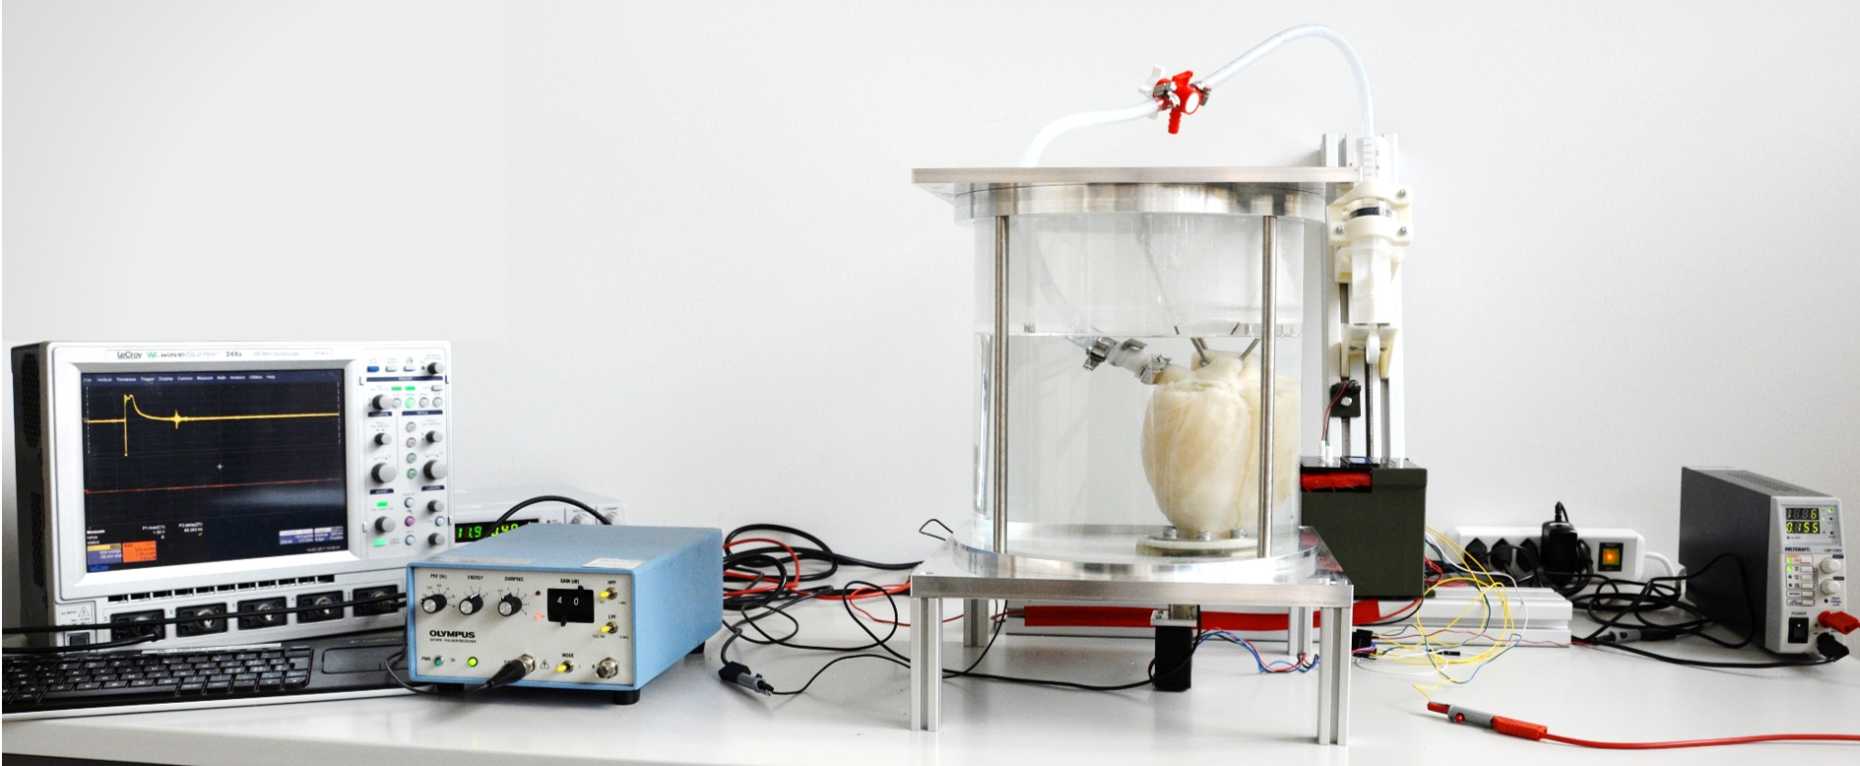 Ultrasound testbench with patient specific heart models